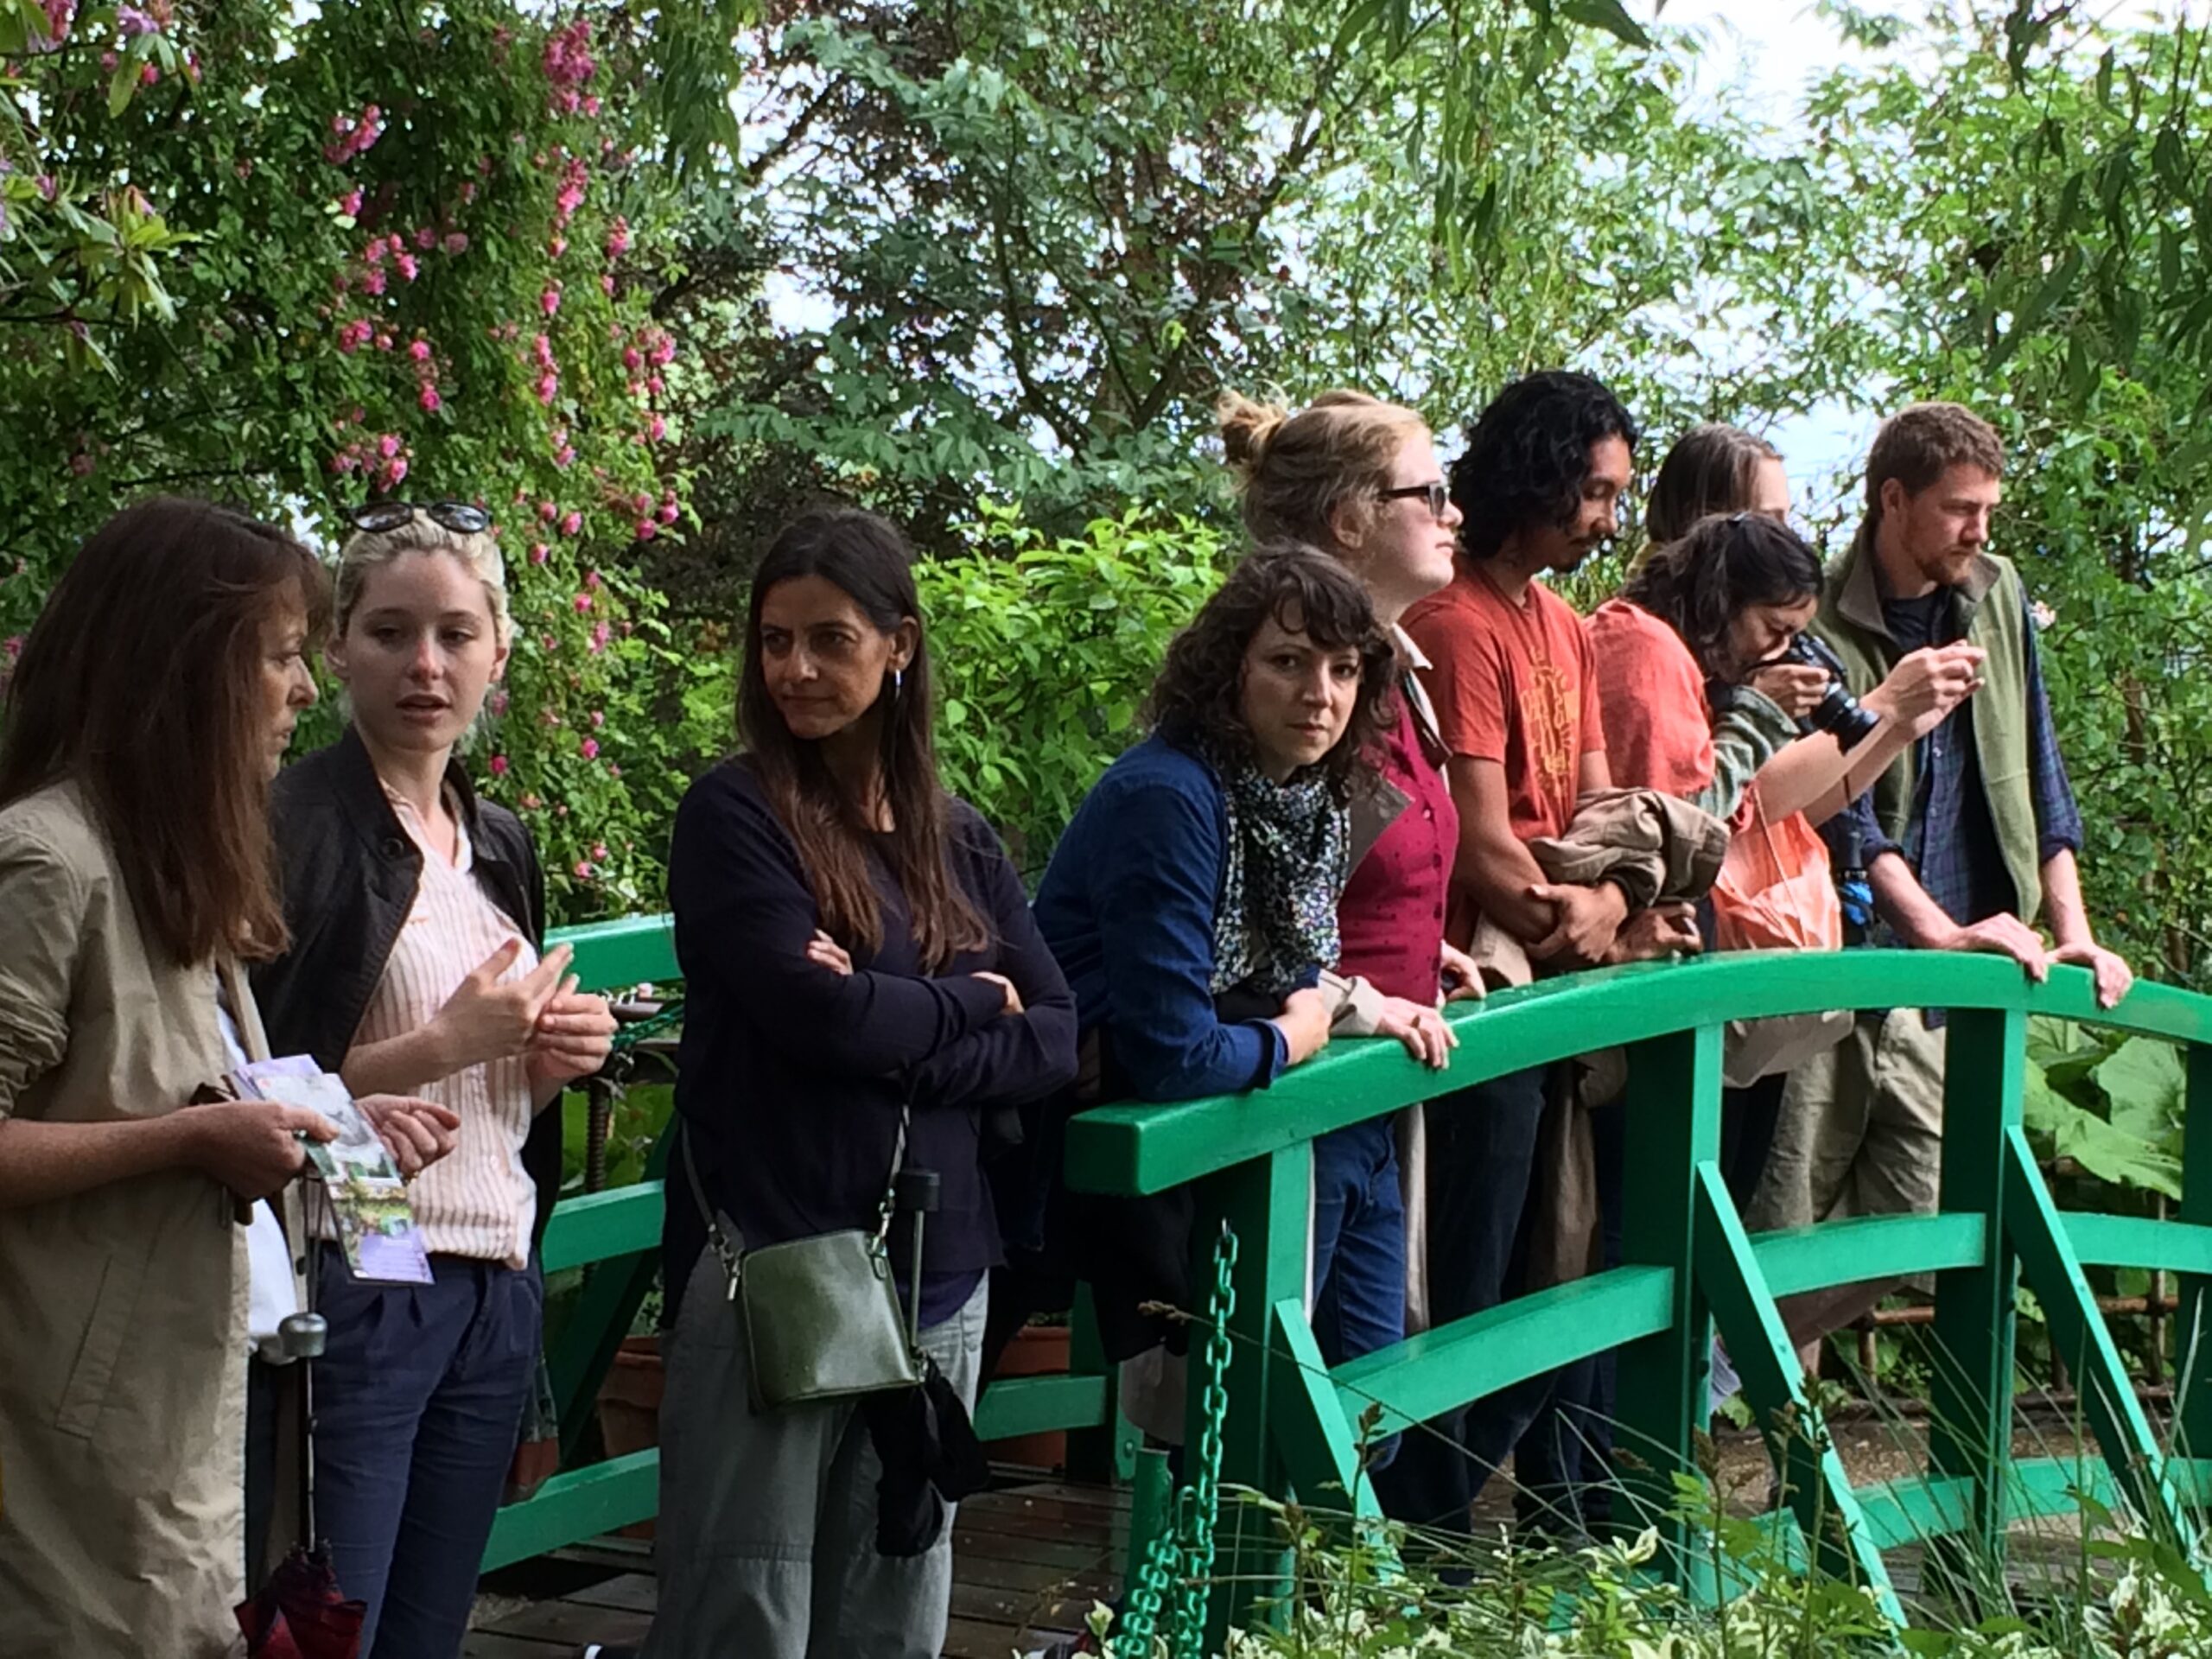 A group of people on a small bridge in Monet's garden viewing the scenery and taking photographs.